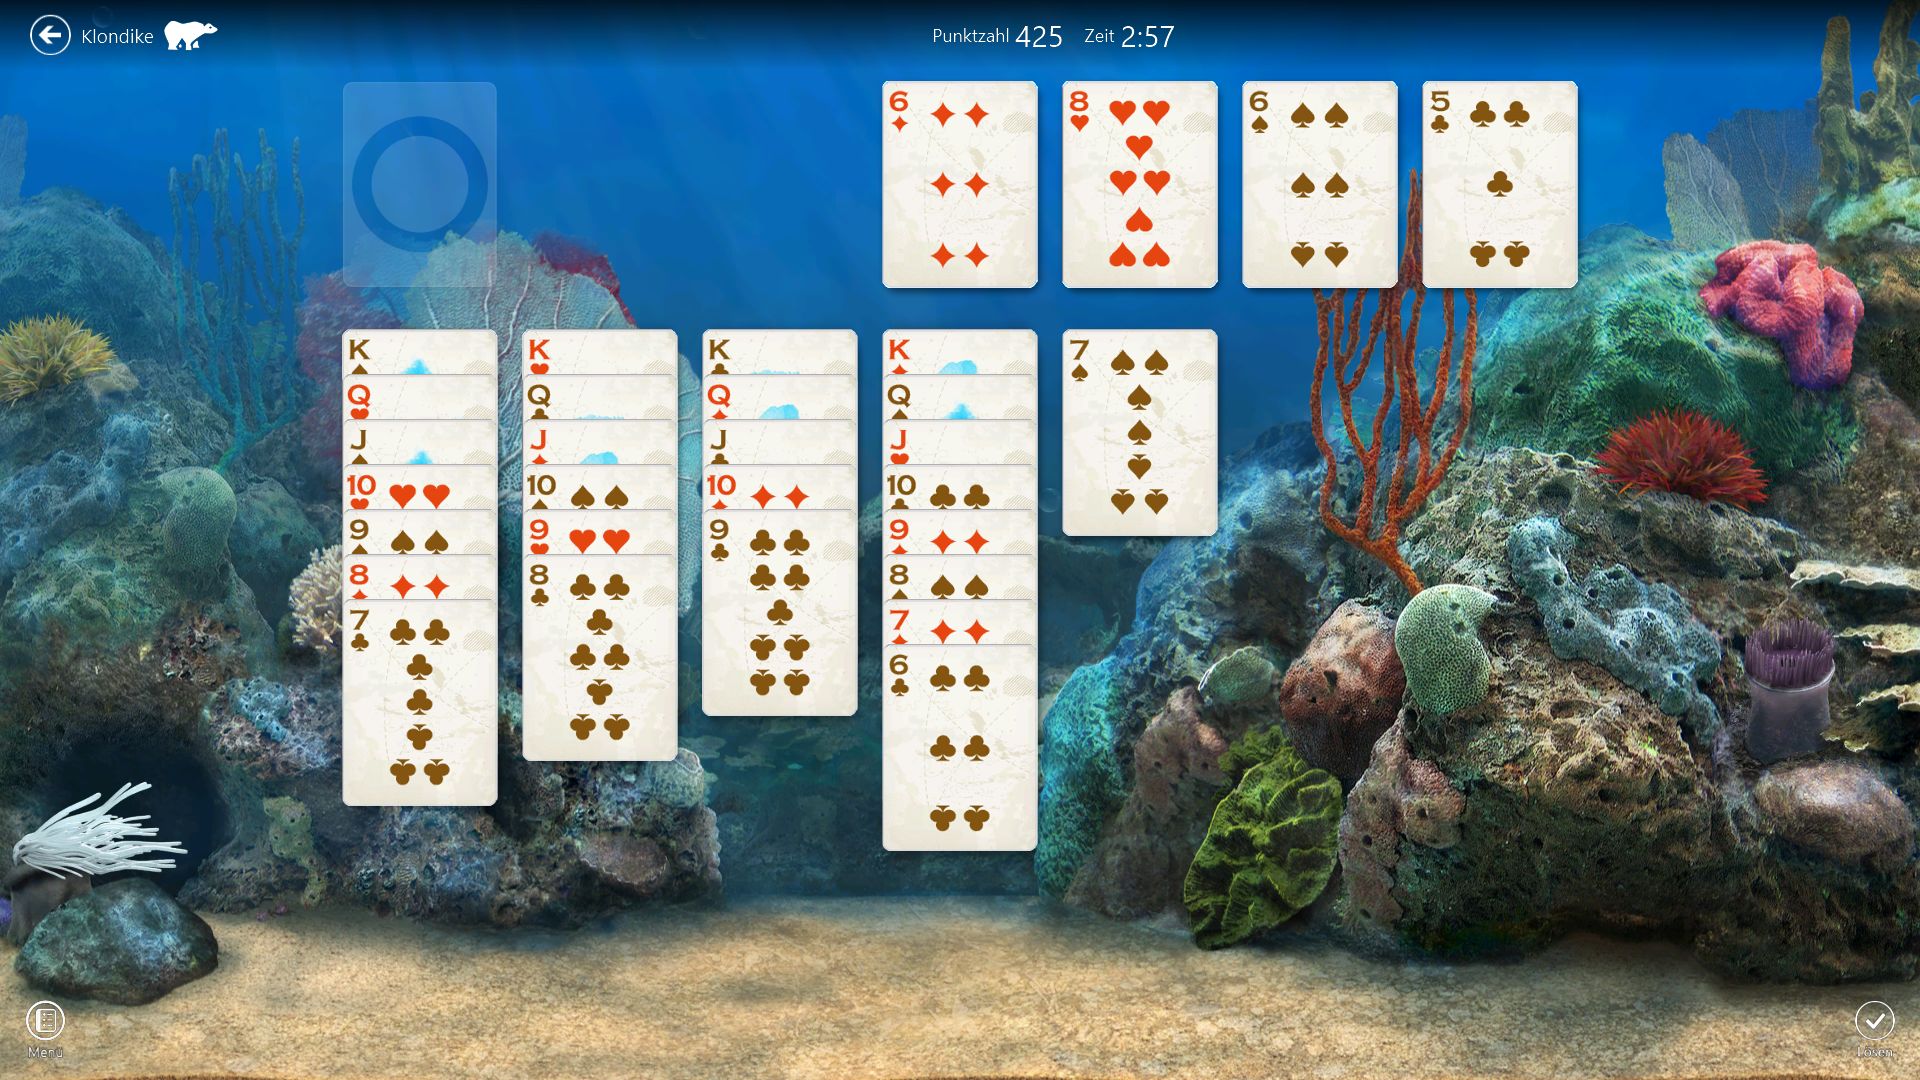 how to reset games on microsoft solitaire collection, windows 8